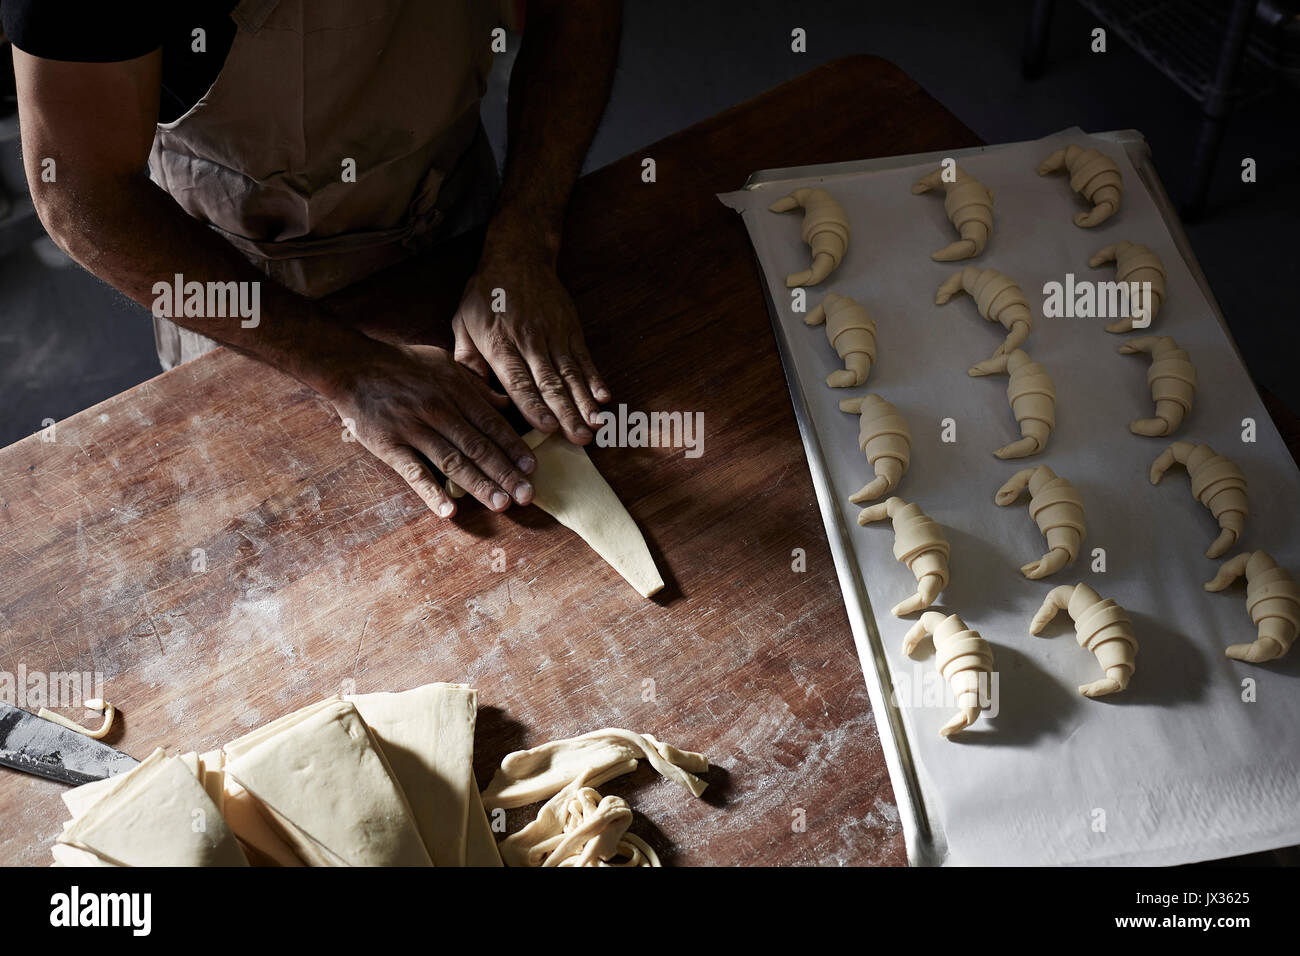 french baker rolling croissants Stock Photo